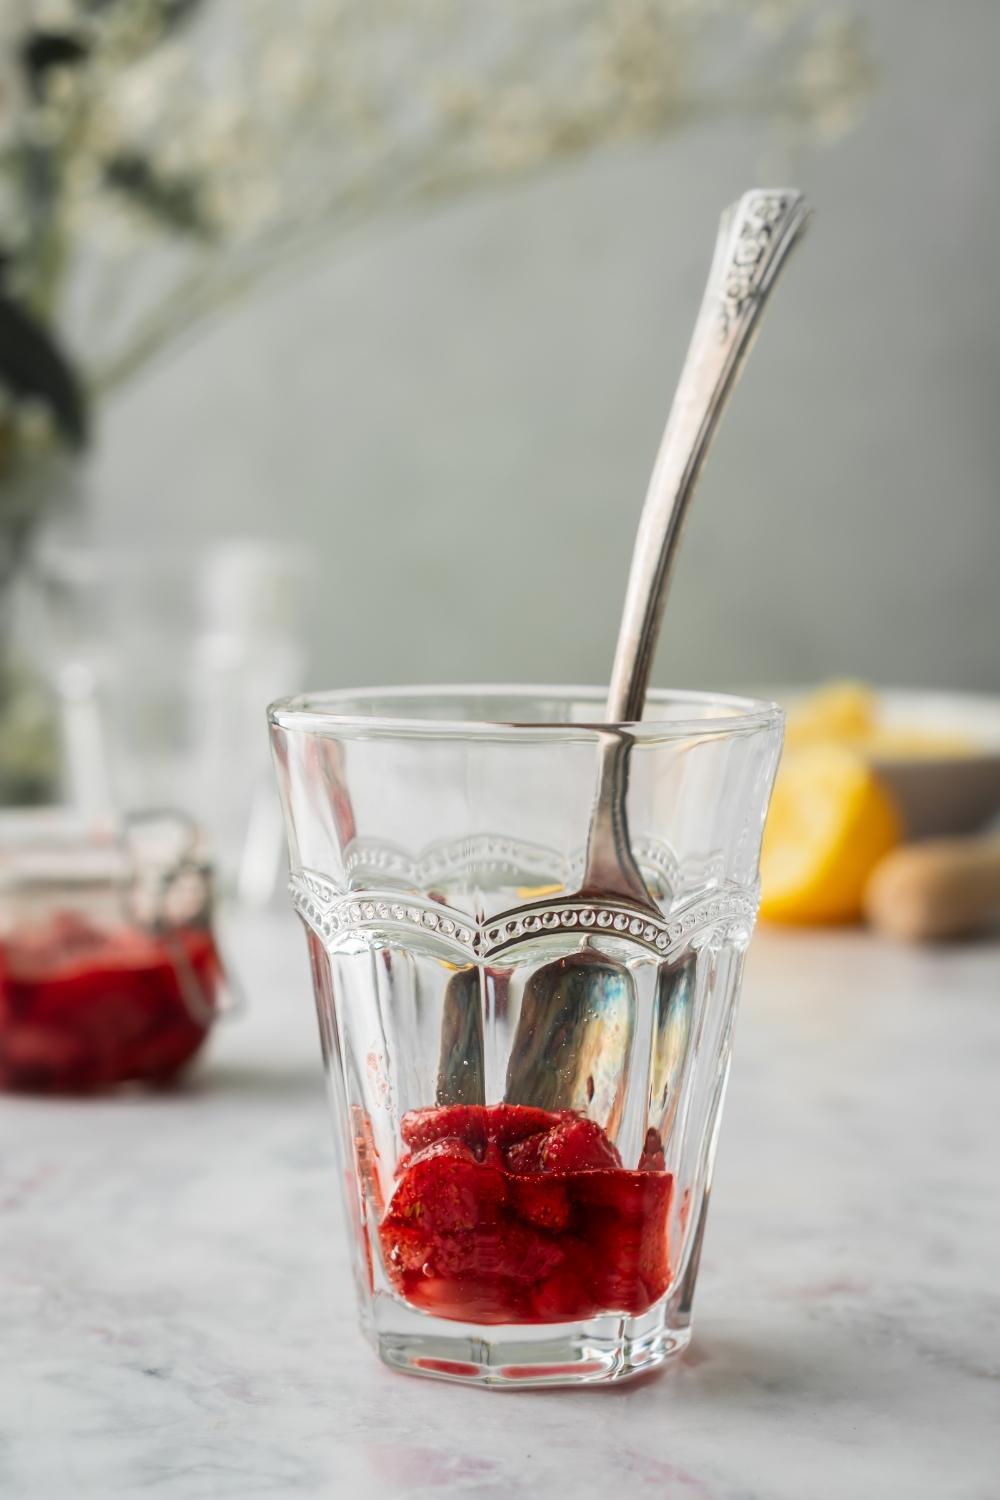 A cup with muddled strawberries and a spoon sticking out of the glass and ingredients to make a slushie behind the glass.